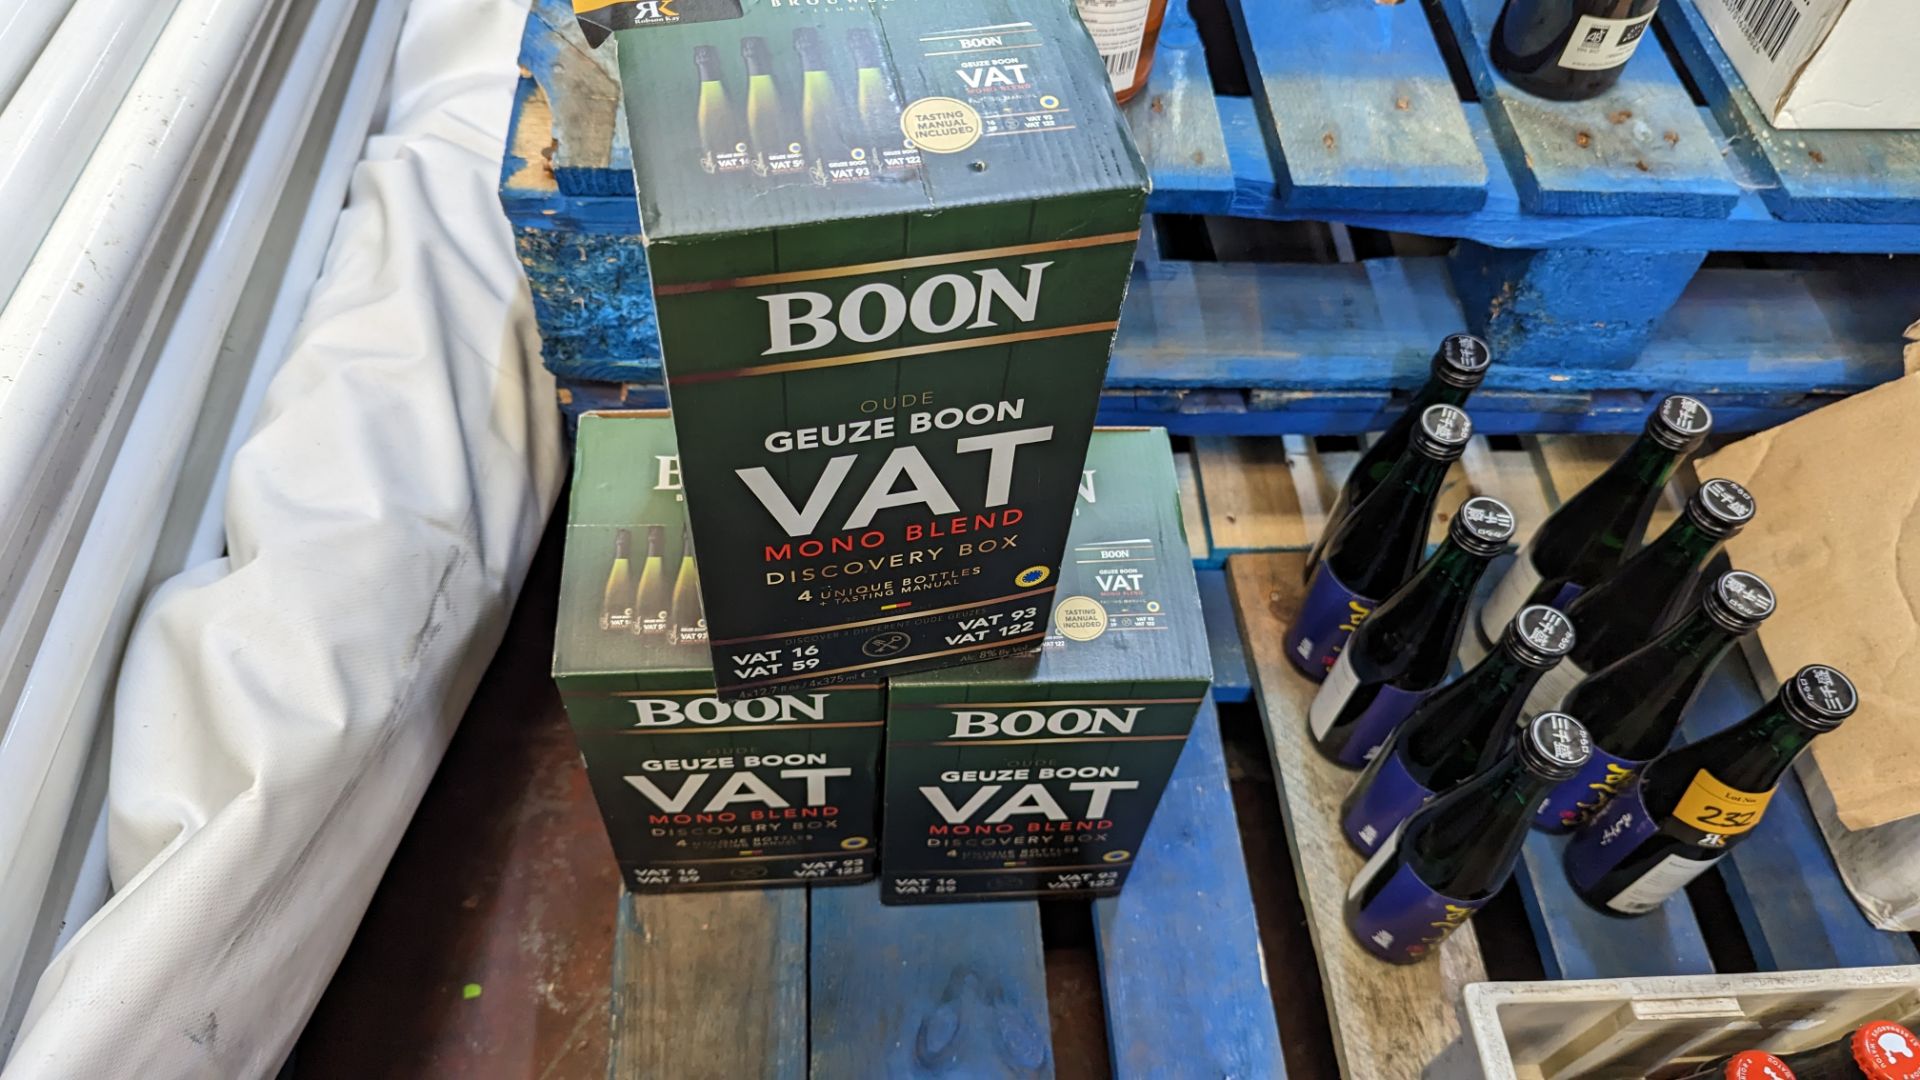 3 off Boon Oude Geuze Boon VAT mono blend discovery boxes, each box containing 4 unique bottles, 8%